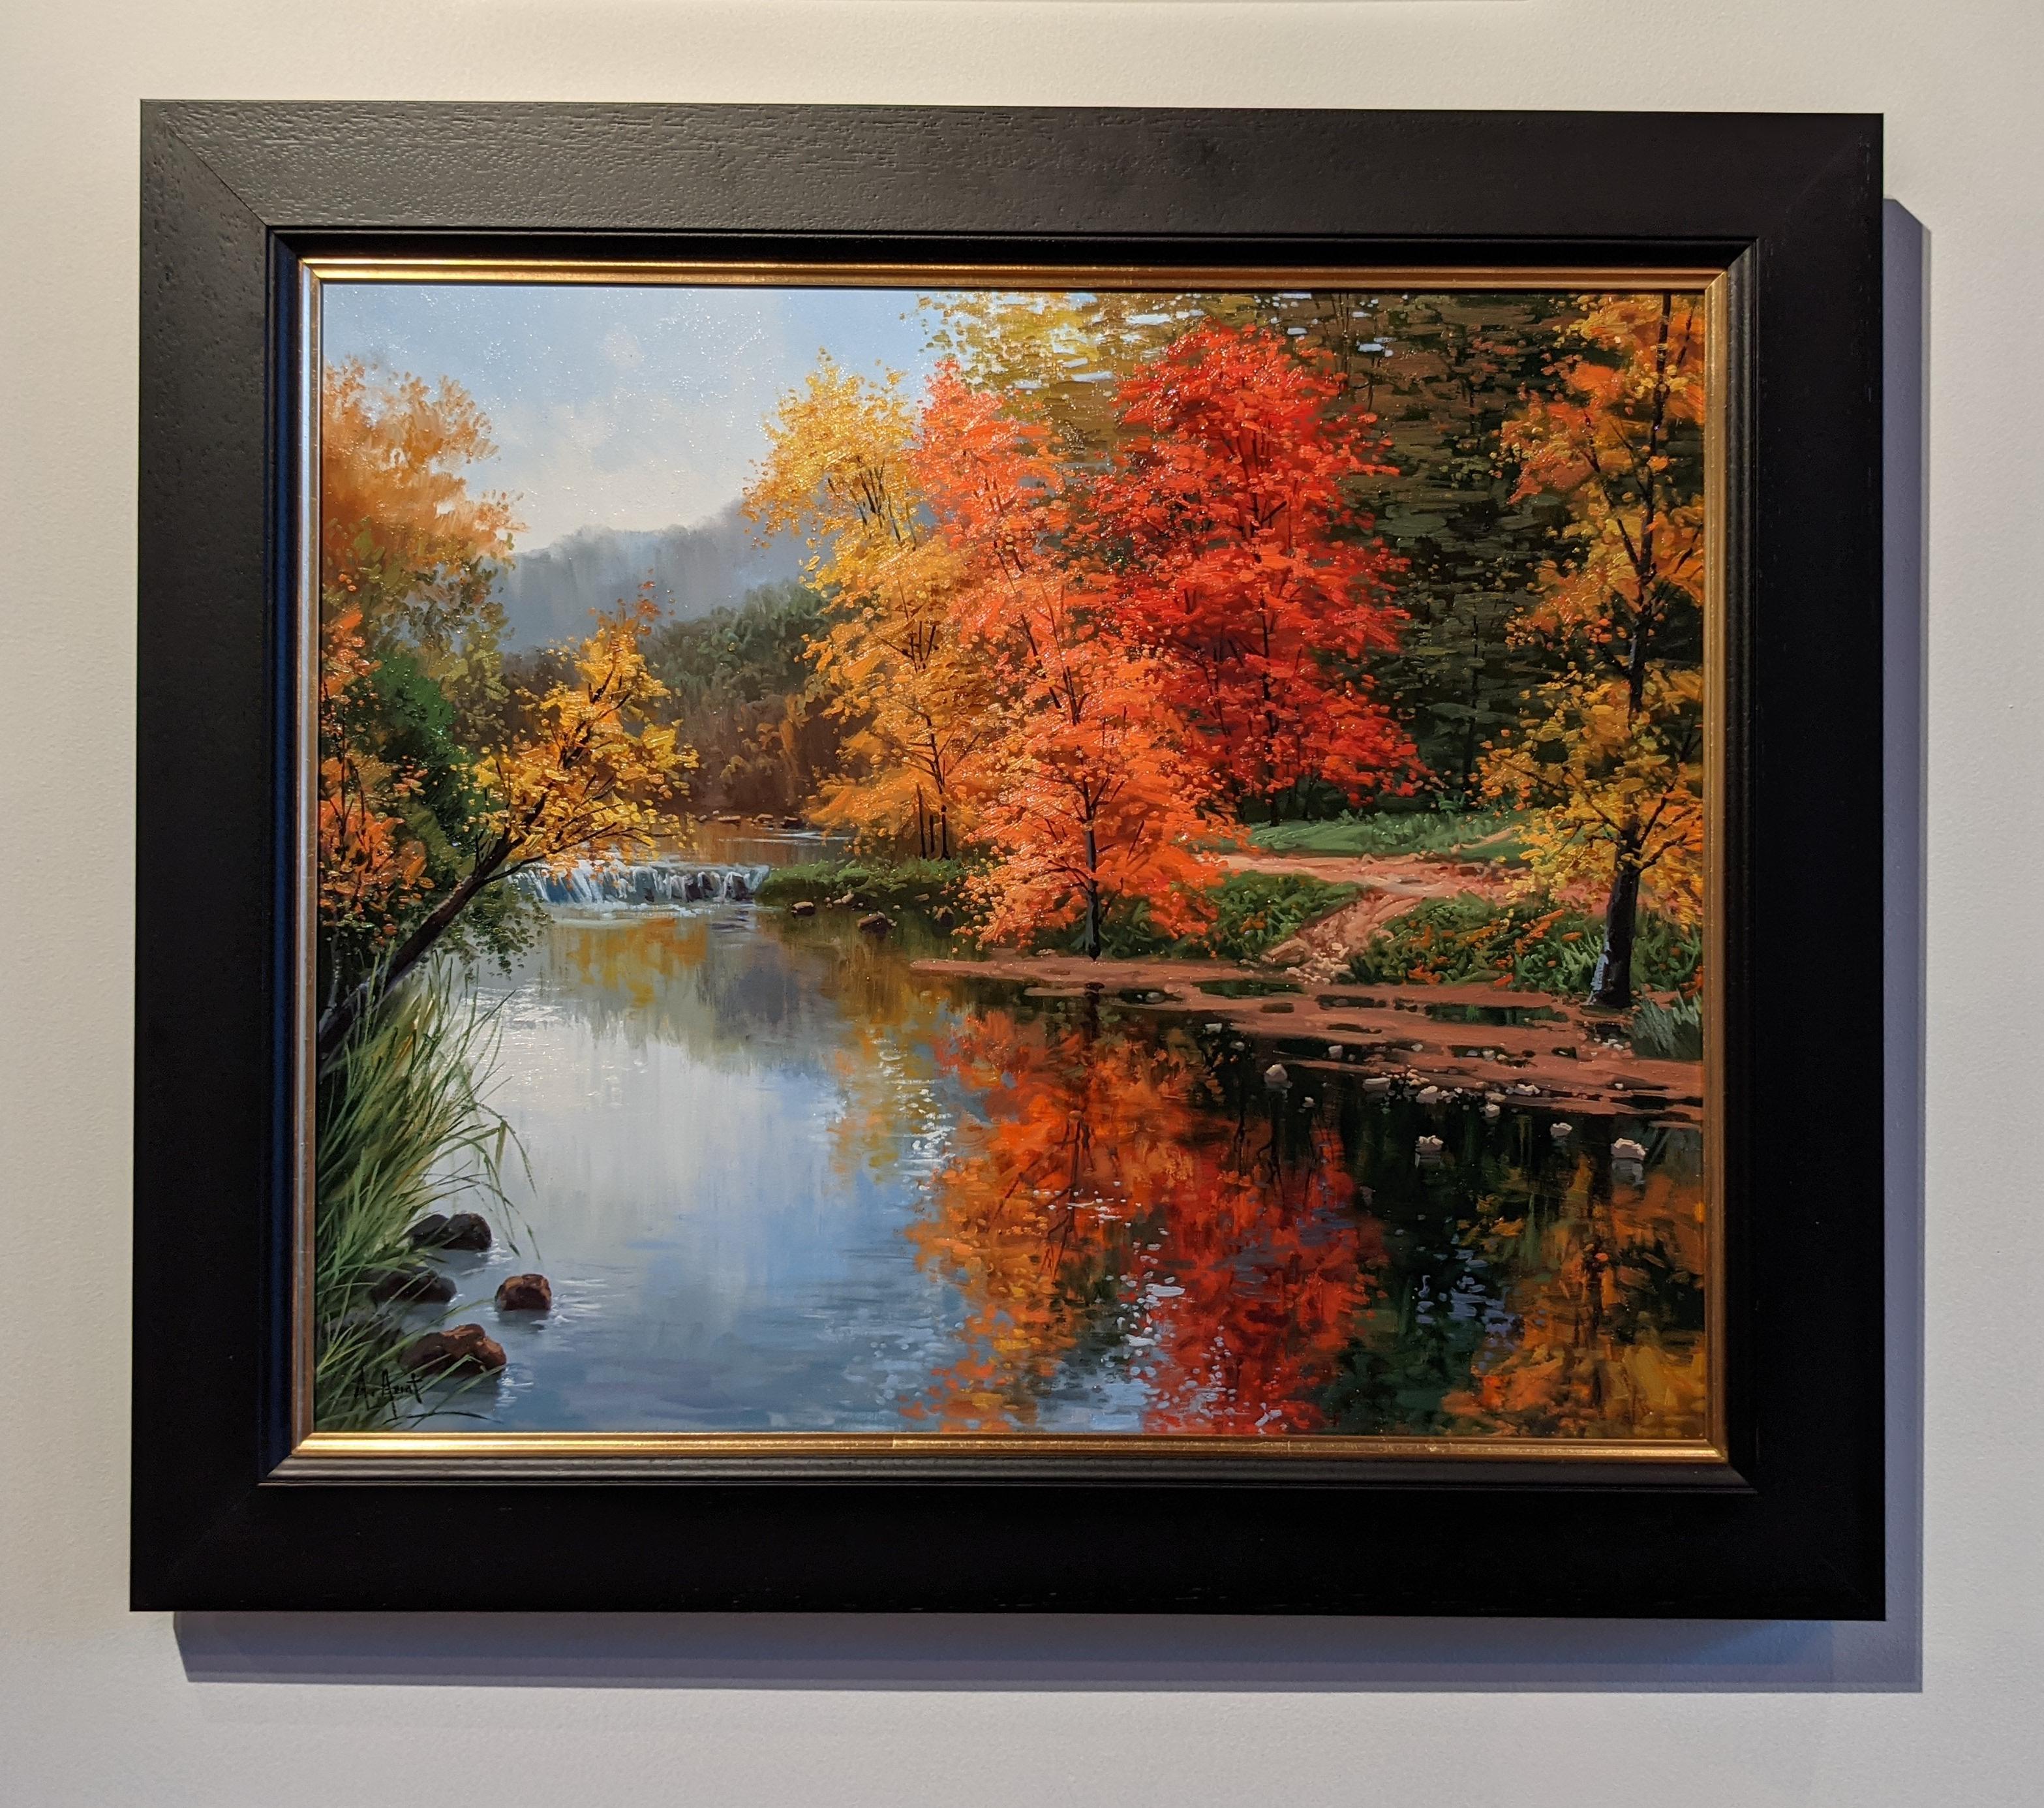 Amal Amatt Landscape Painting - 'Autumnal Afternoon' Red Contemporary landscape painting of a river and trees